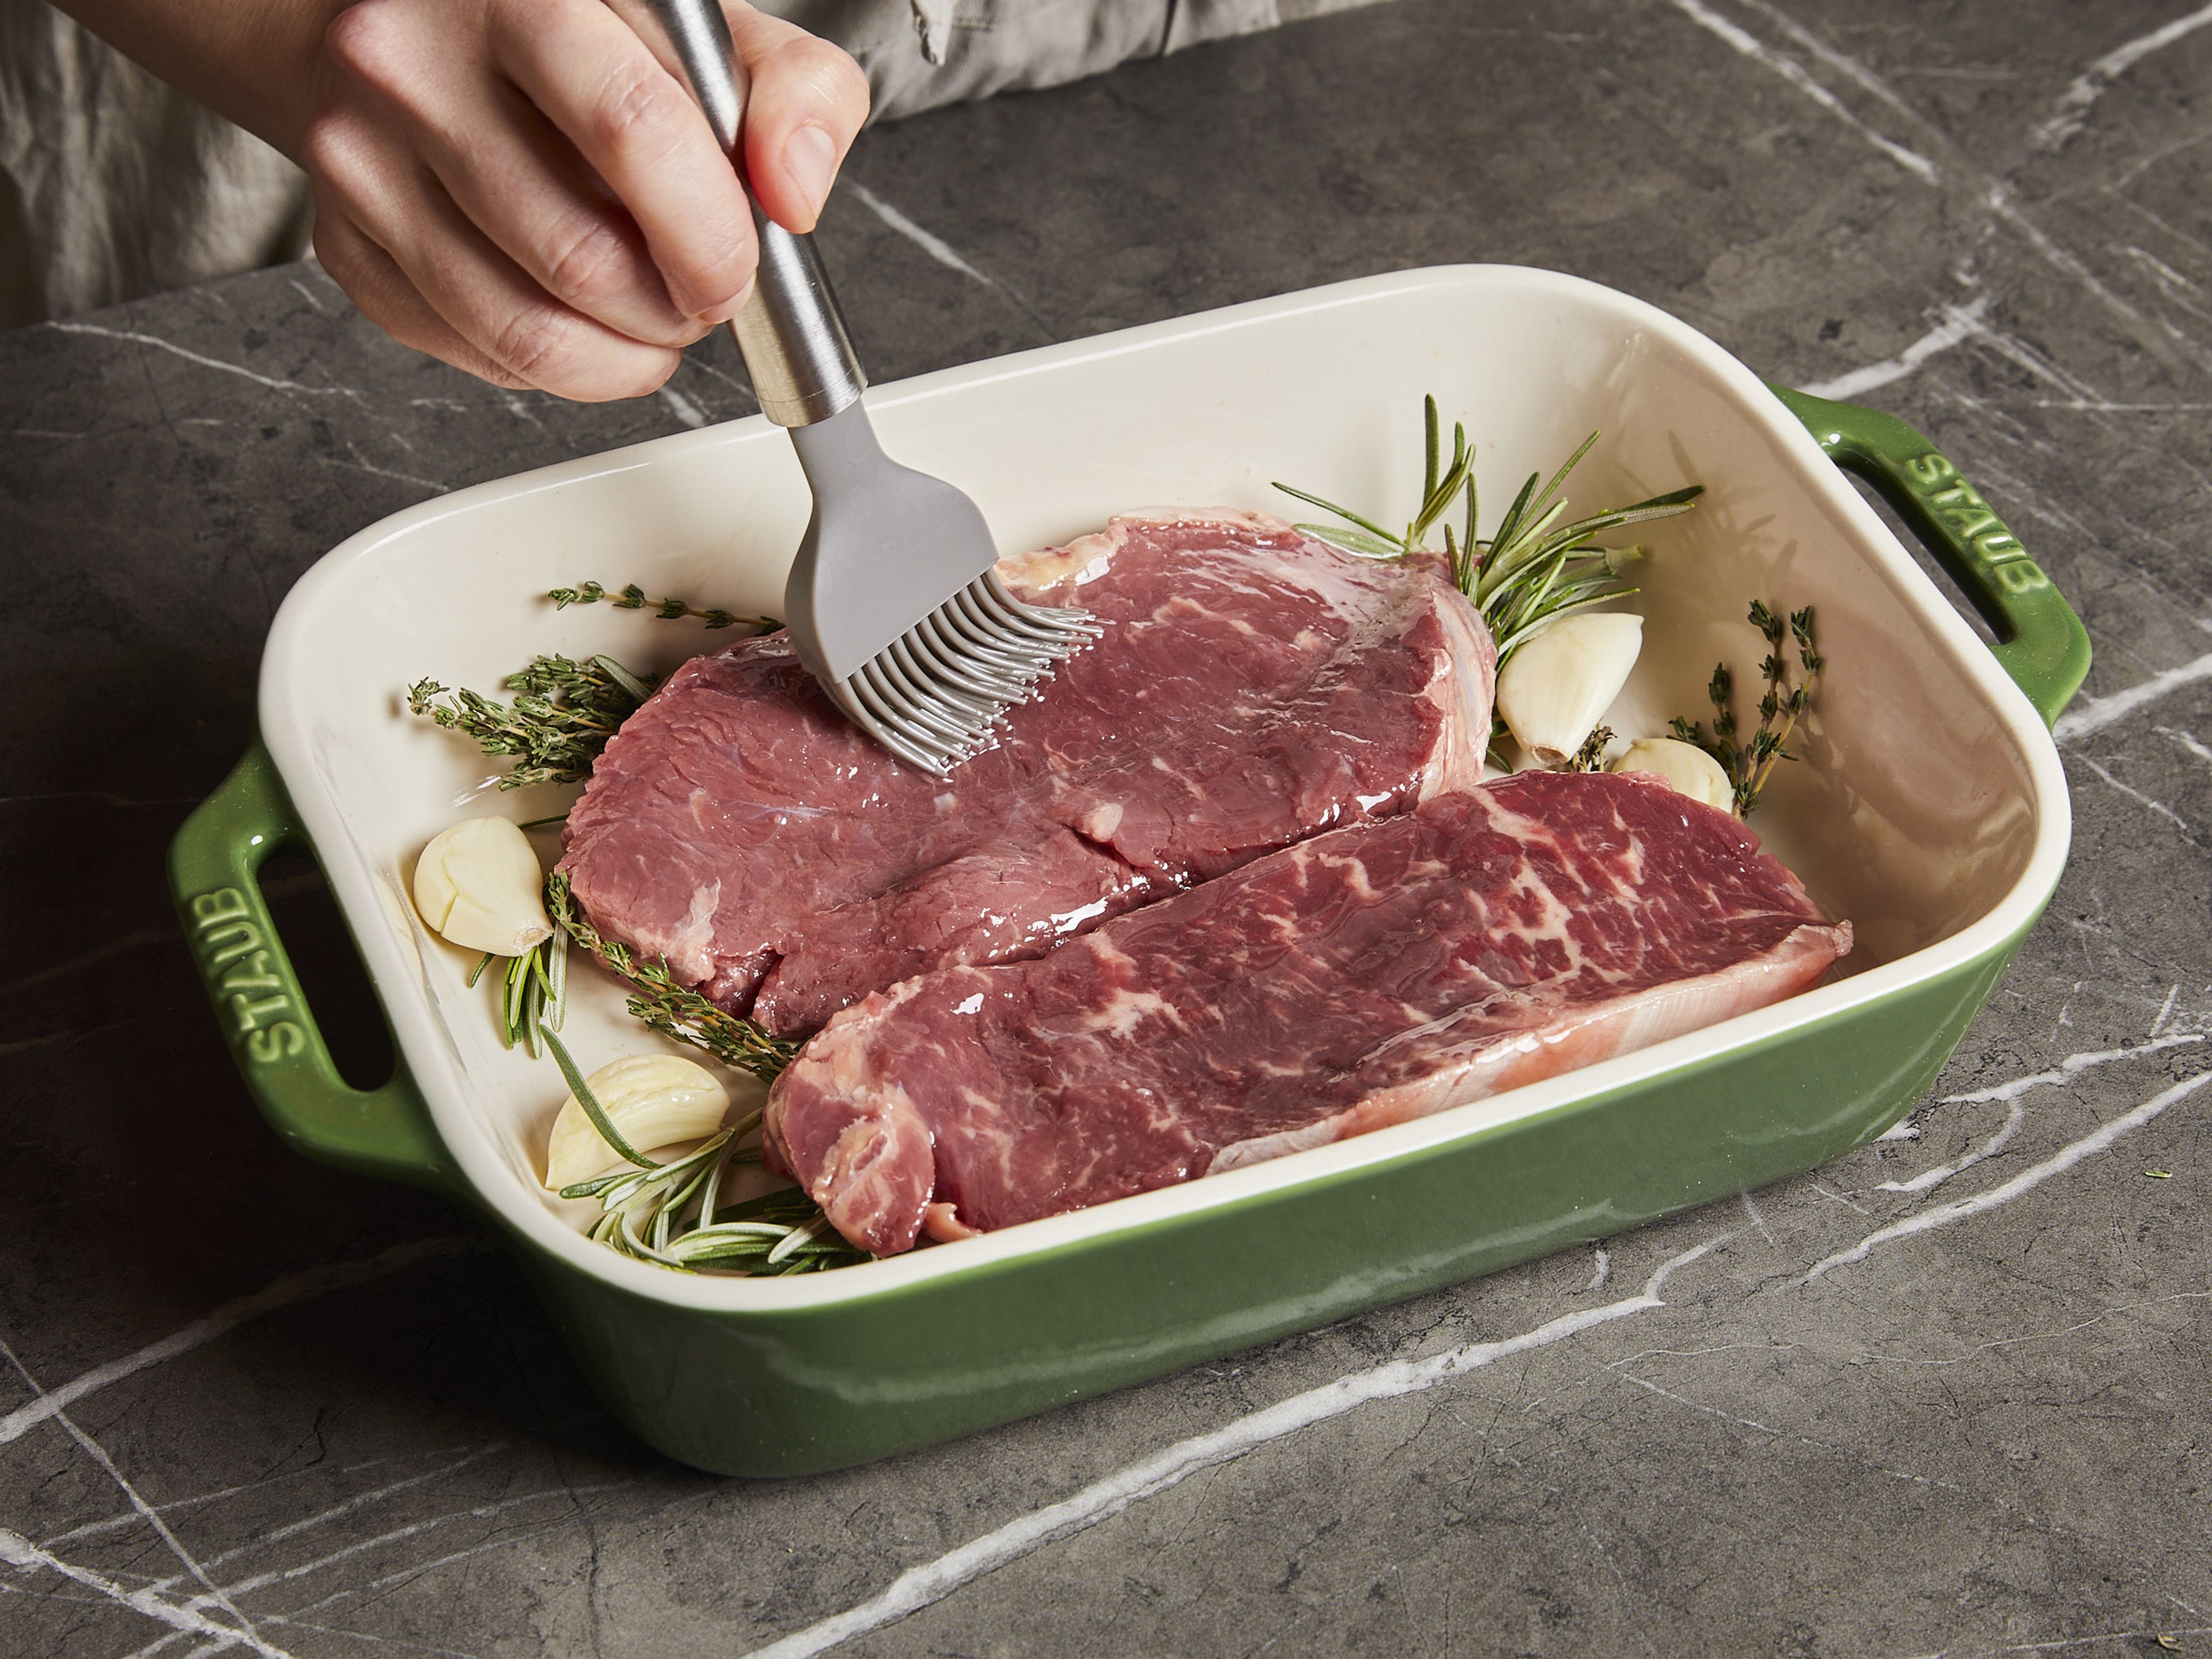 Brush the steaks with a little oil, season with salt and pepper and place in a baking dish with the herbs and peeled garlic cloves. Cook the steaks in the oven for approx. 50–60 min. or until the core temperature reaches the desired doneness (approx. 54–55°C/129–131°F for medium).